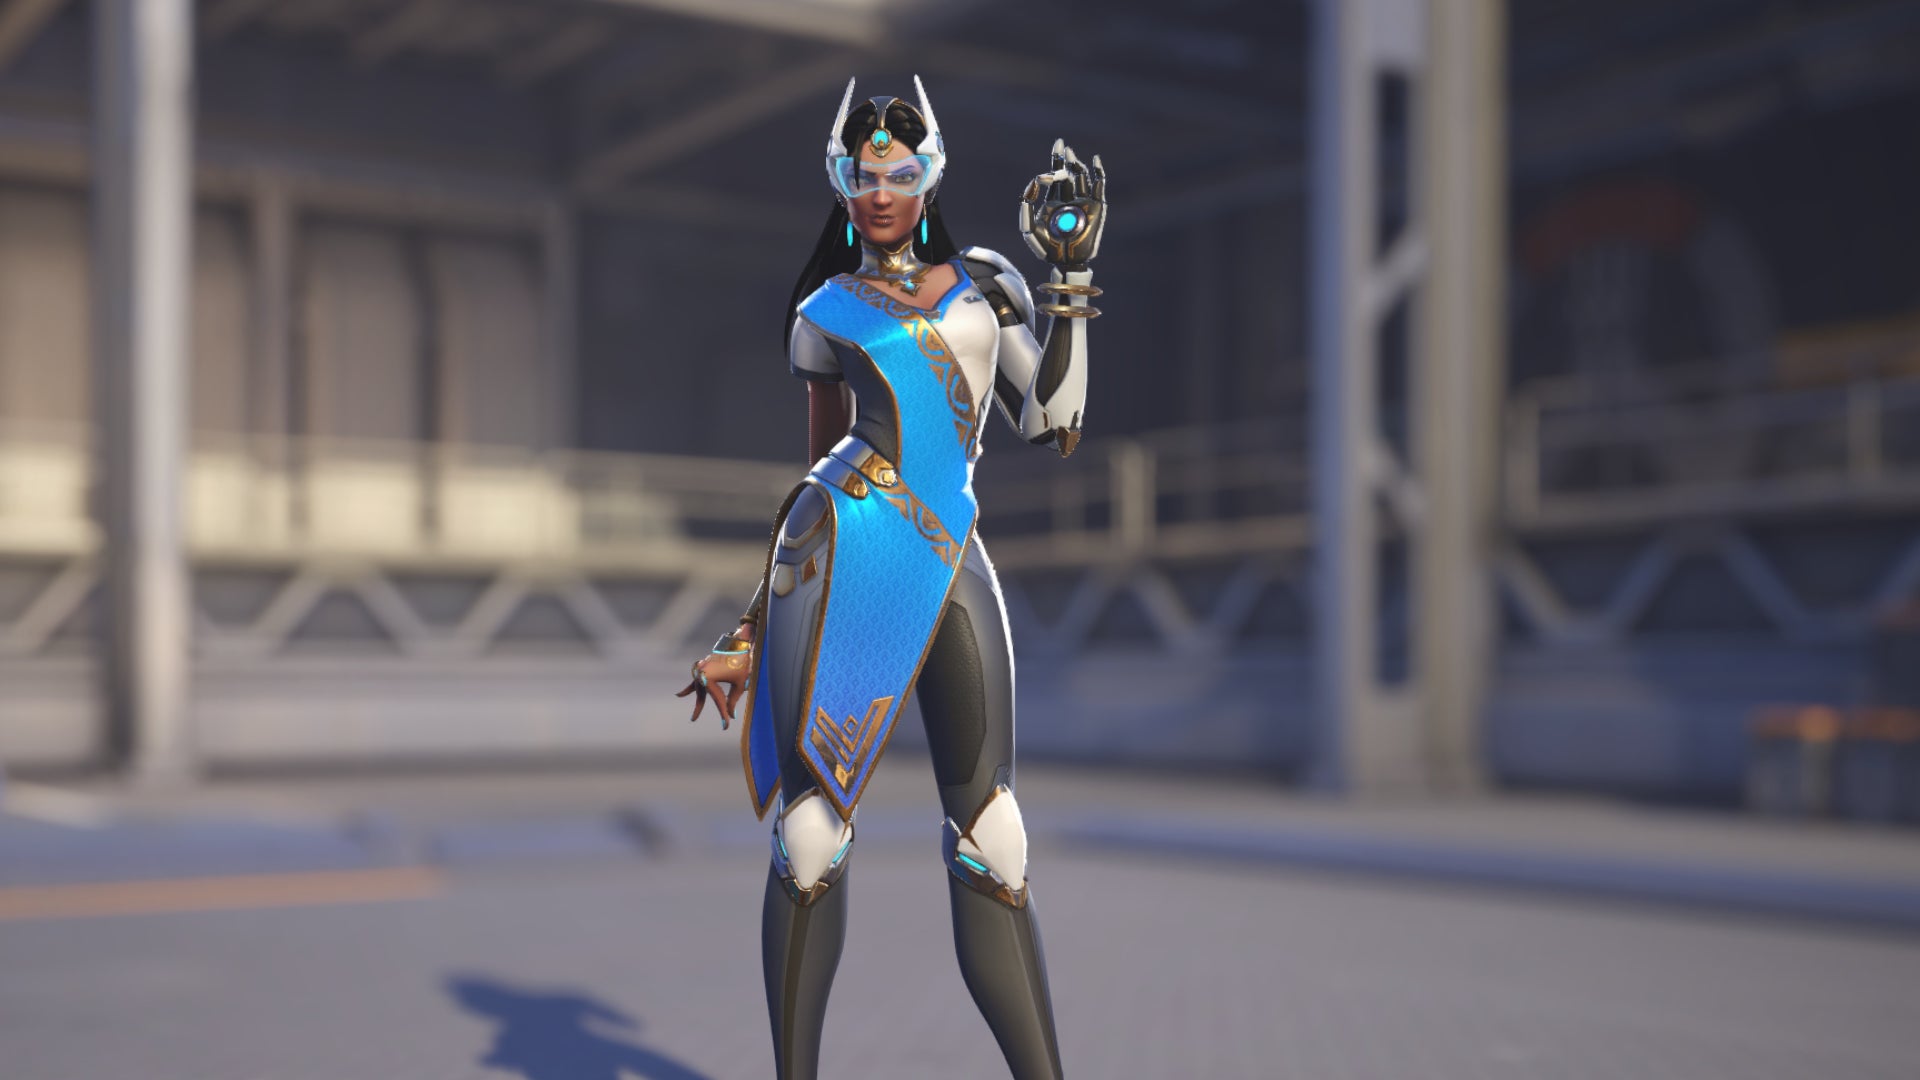 Symmetra, a hero in Overwatch 2, poses before the camera in the hero selection screen.